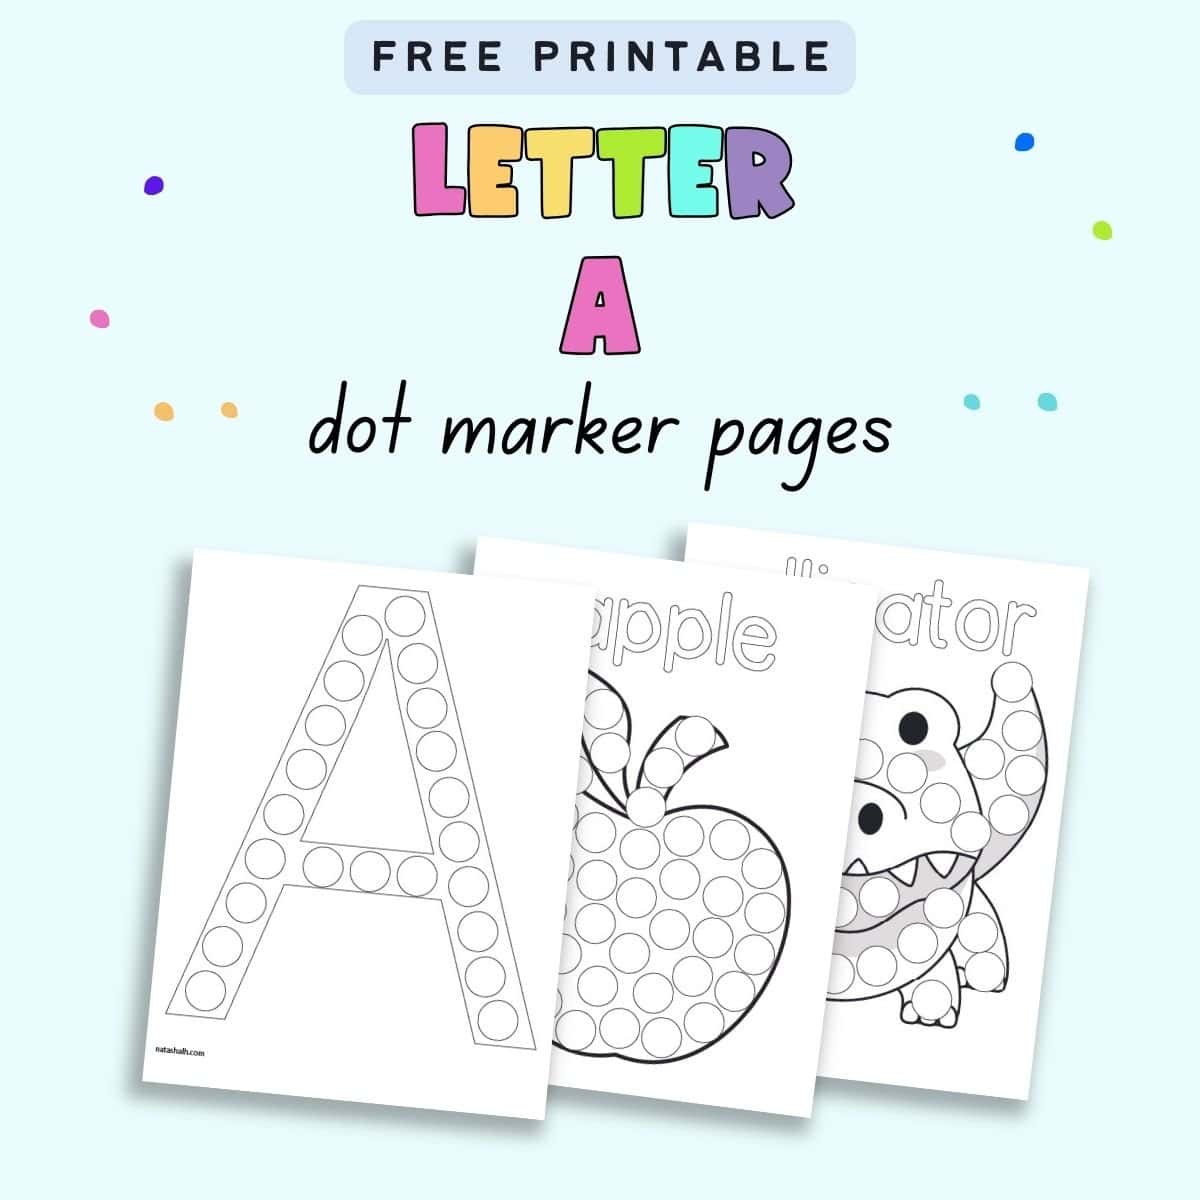 Text "free printable letter a dot marker pages" with a preview of three dot marker pages. One shows a letter A, another an apple, and the last an alligator